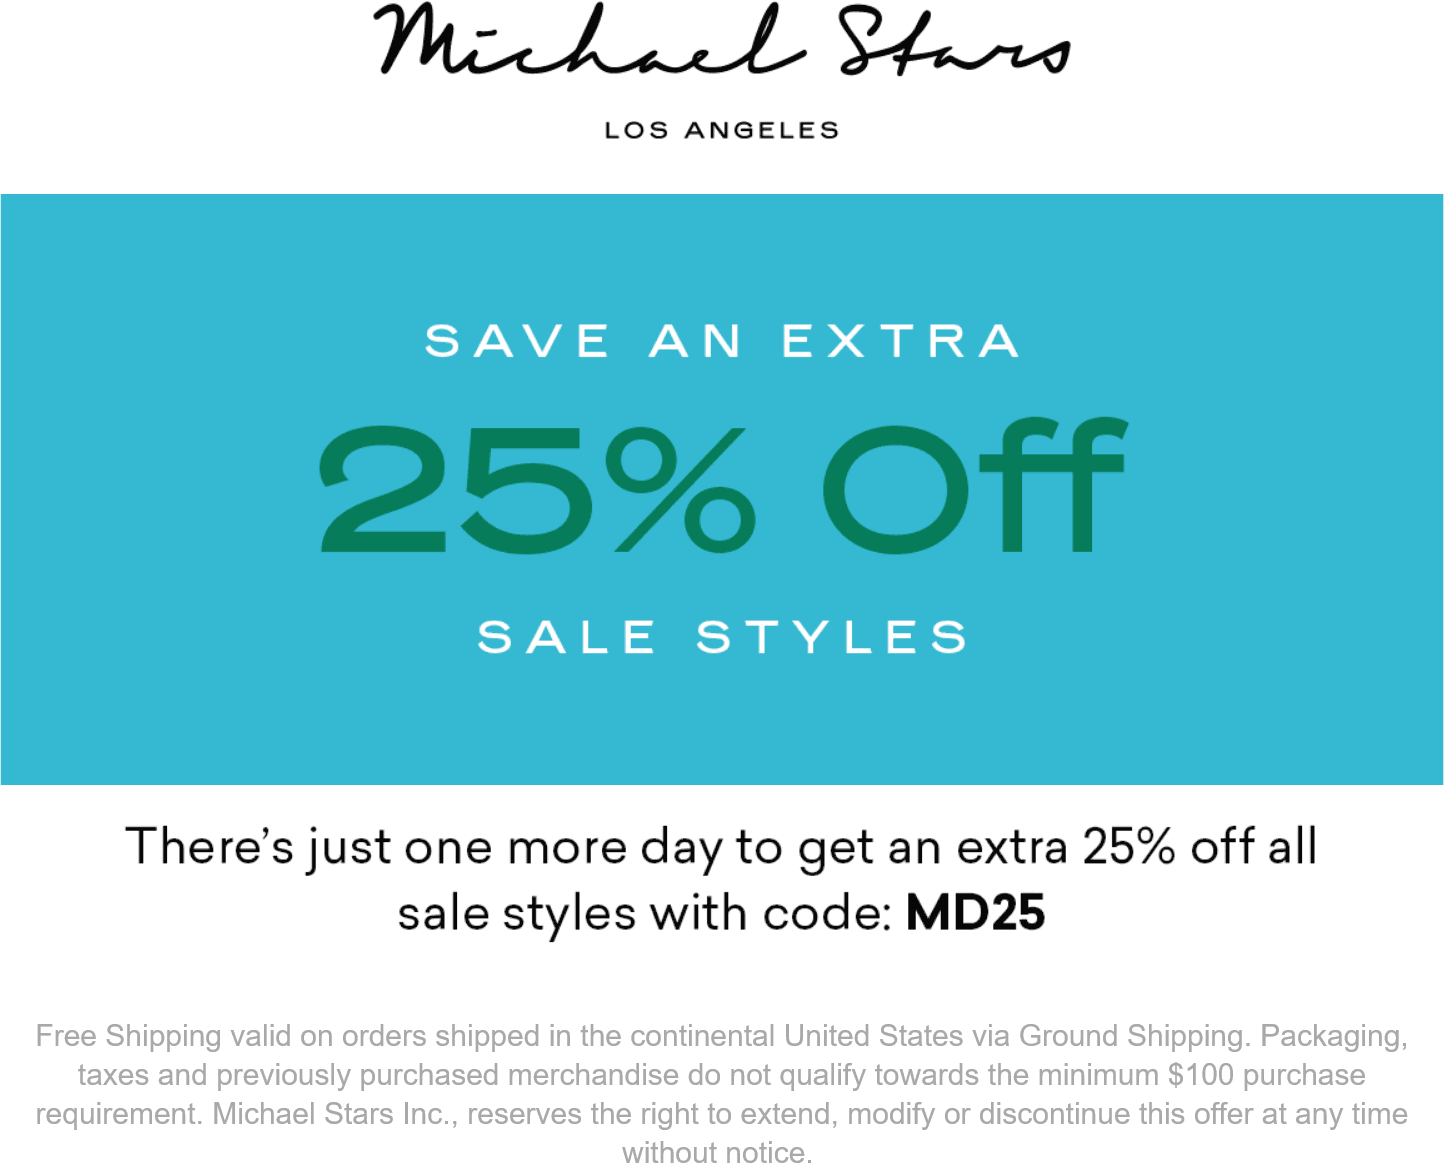 Michael Stars coupons & promo code for [December 2022]